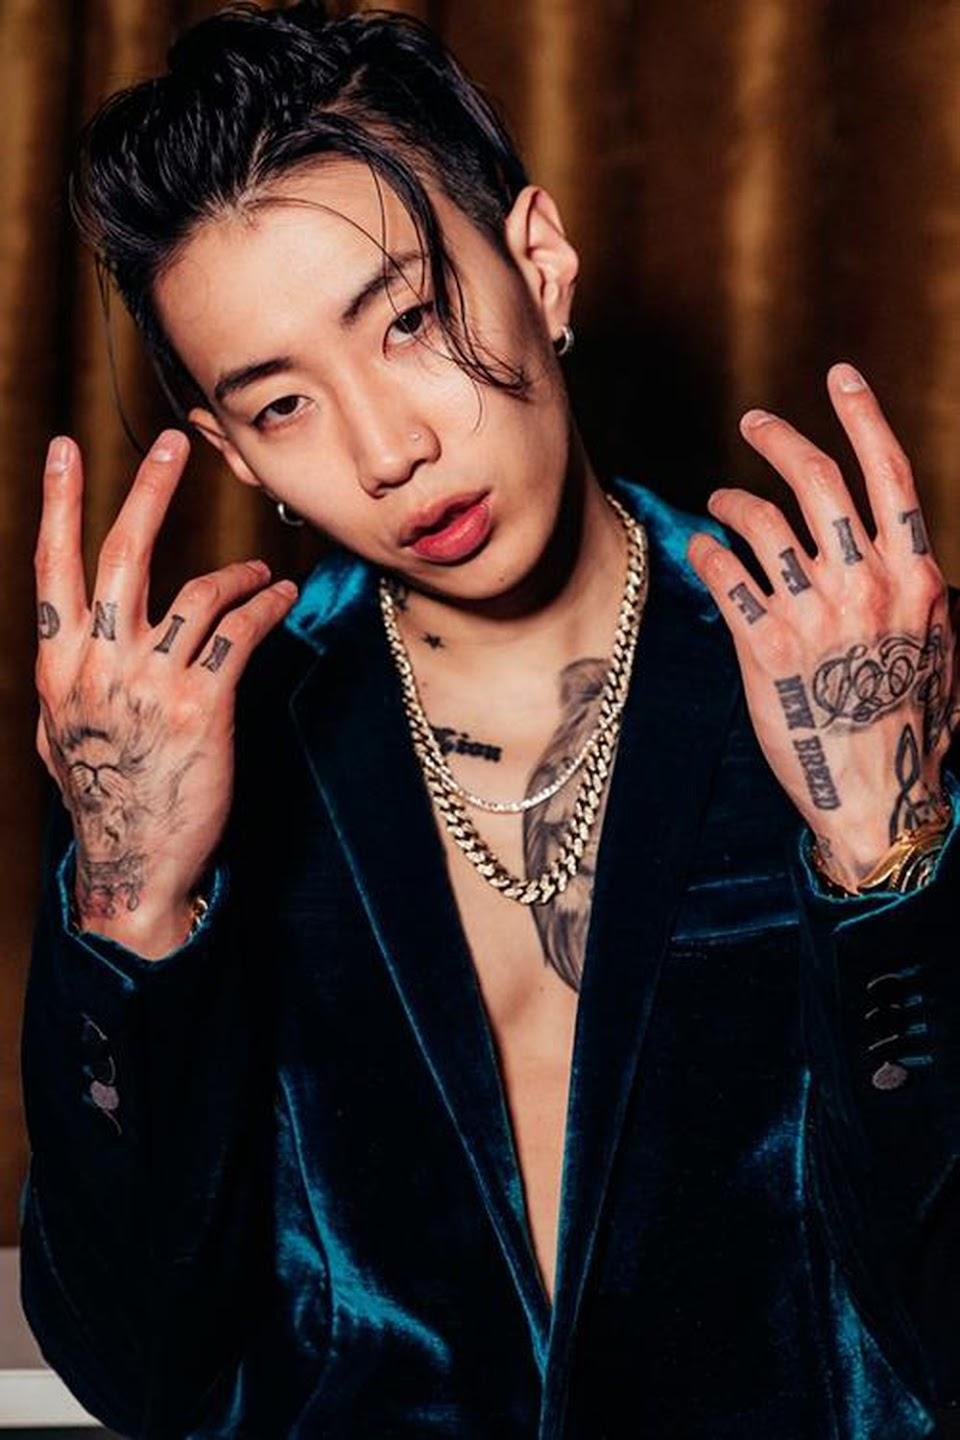 Jay Park
Jay Park often reveals his tattoos when he performs shirtless during concerts or music videos. He has a beautiful lion tattoo that spans his entire left pectoral muscle - and Jay Park is lion-hearted indeed! Further nods to his music journey include an AOMG tattoo on his leg, representing the entertainment agency he established, and 'New Breed' inked on his left hand, commemorating the title of his debut album.